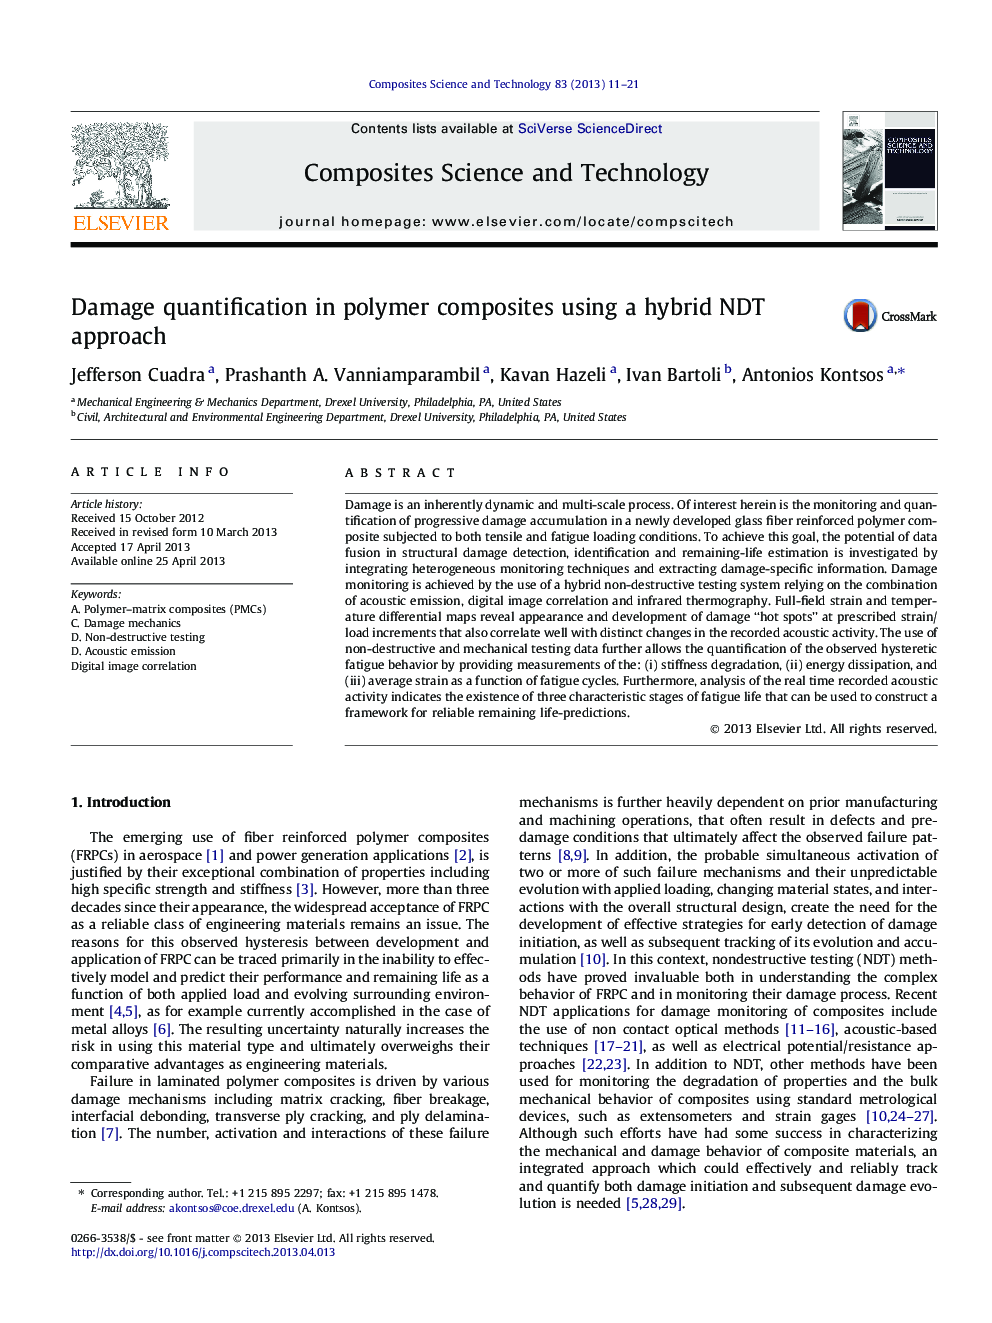 Damage quantification in polymer composites using a hybrid NDT approach